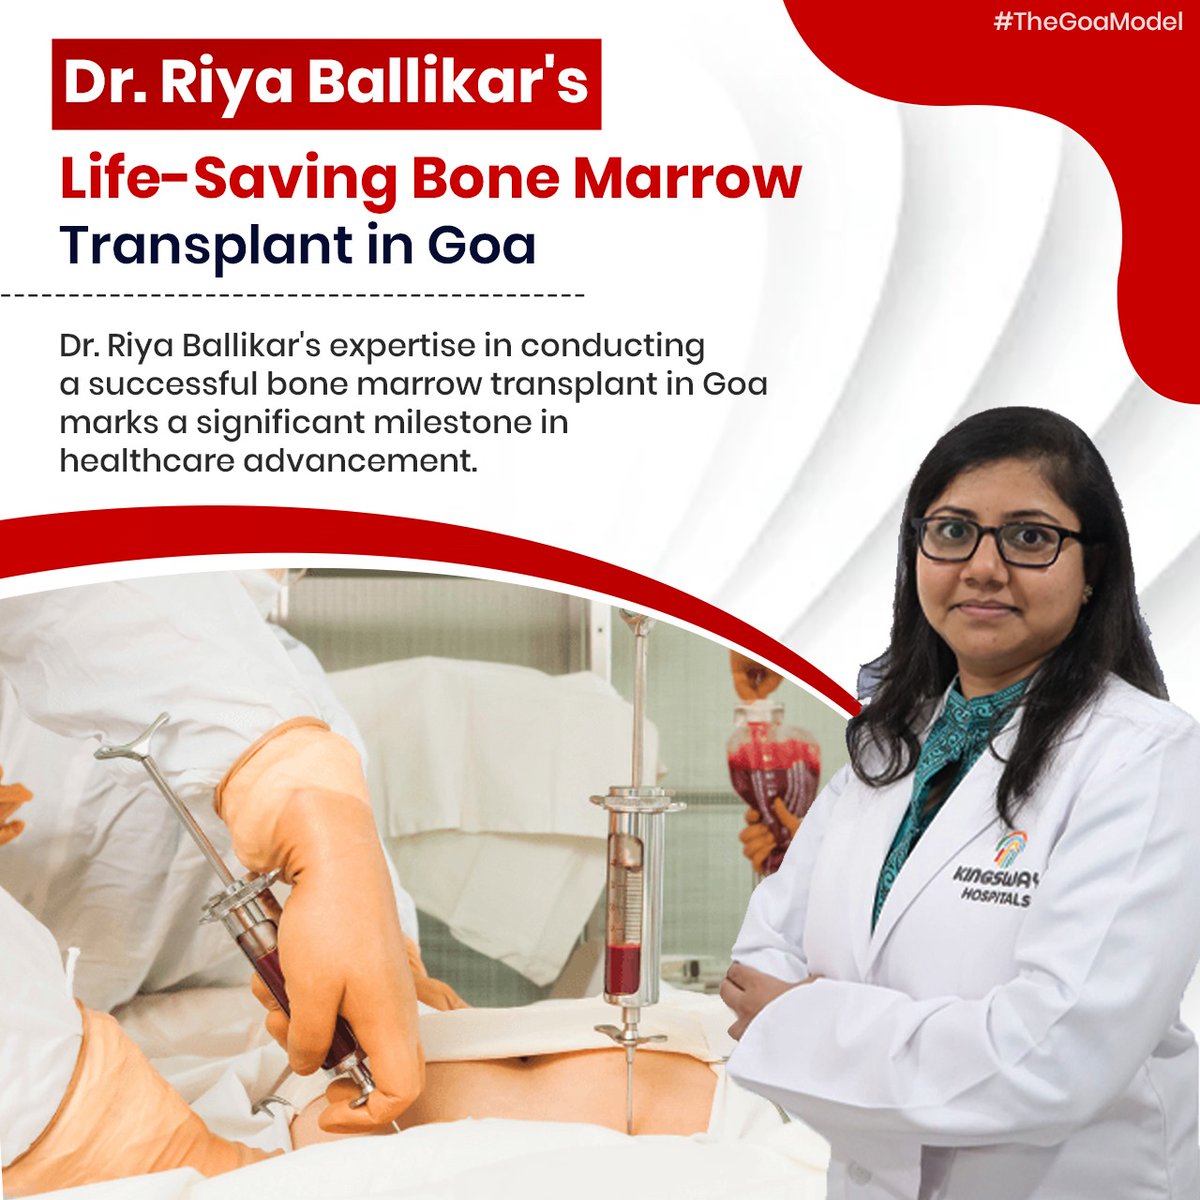 Proud moment for Goa as Dr. Riya Ballikar conducts a life-saving bone marrow transplant surgery, bringing hope and healing. Her commitment to extending services in Goa is truly commendable. #GoaHealthcare #BoneMarrowTransplant #TheGoaModel
#GoaPride  #LifeSavingSurgery